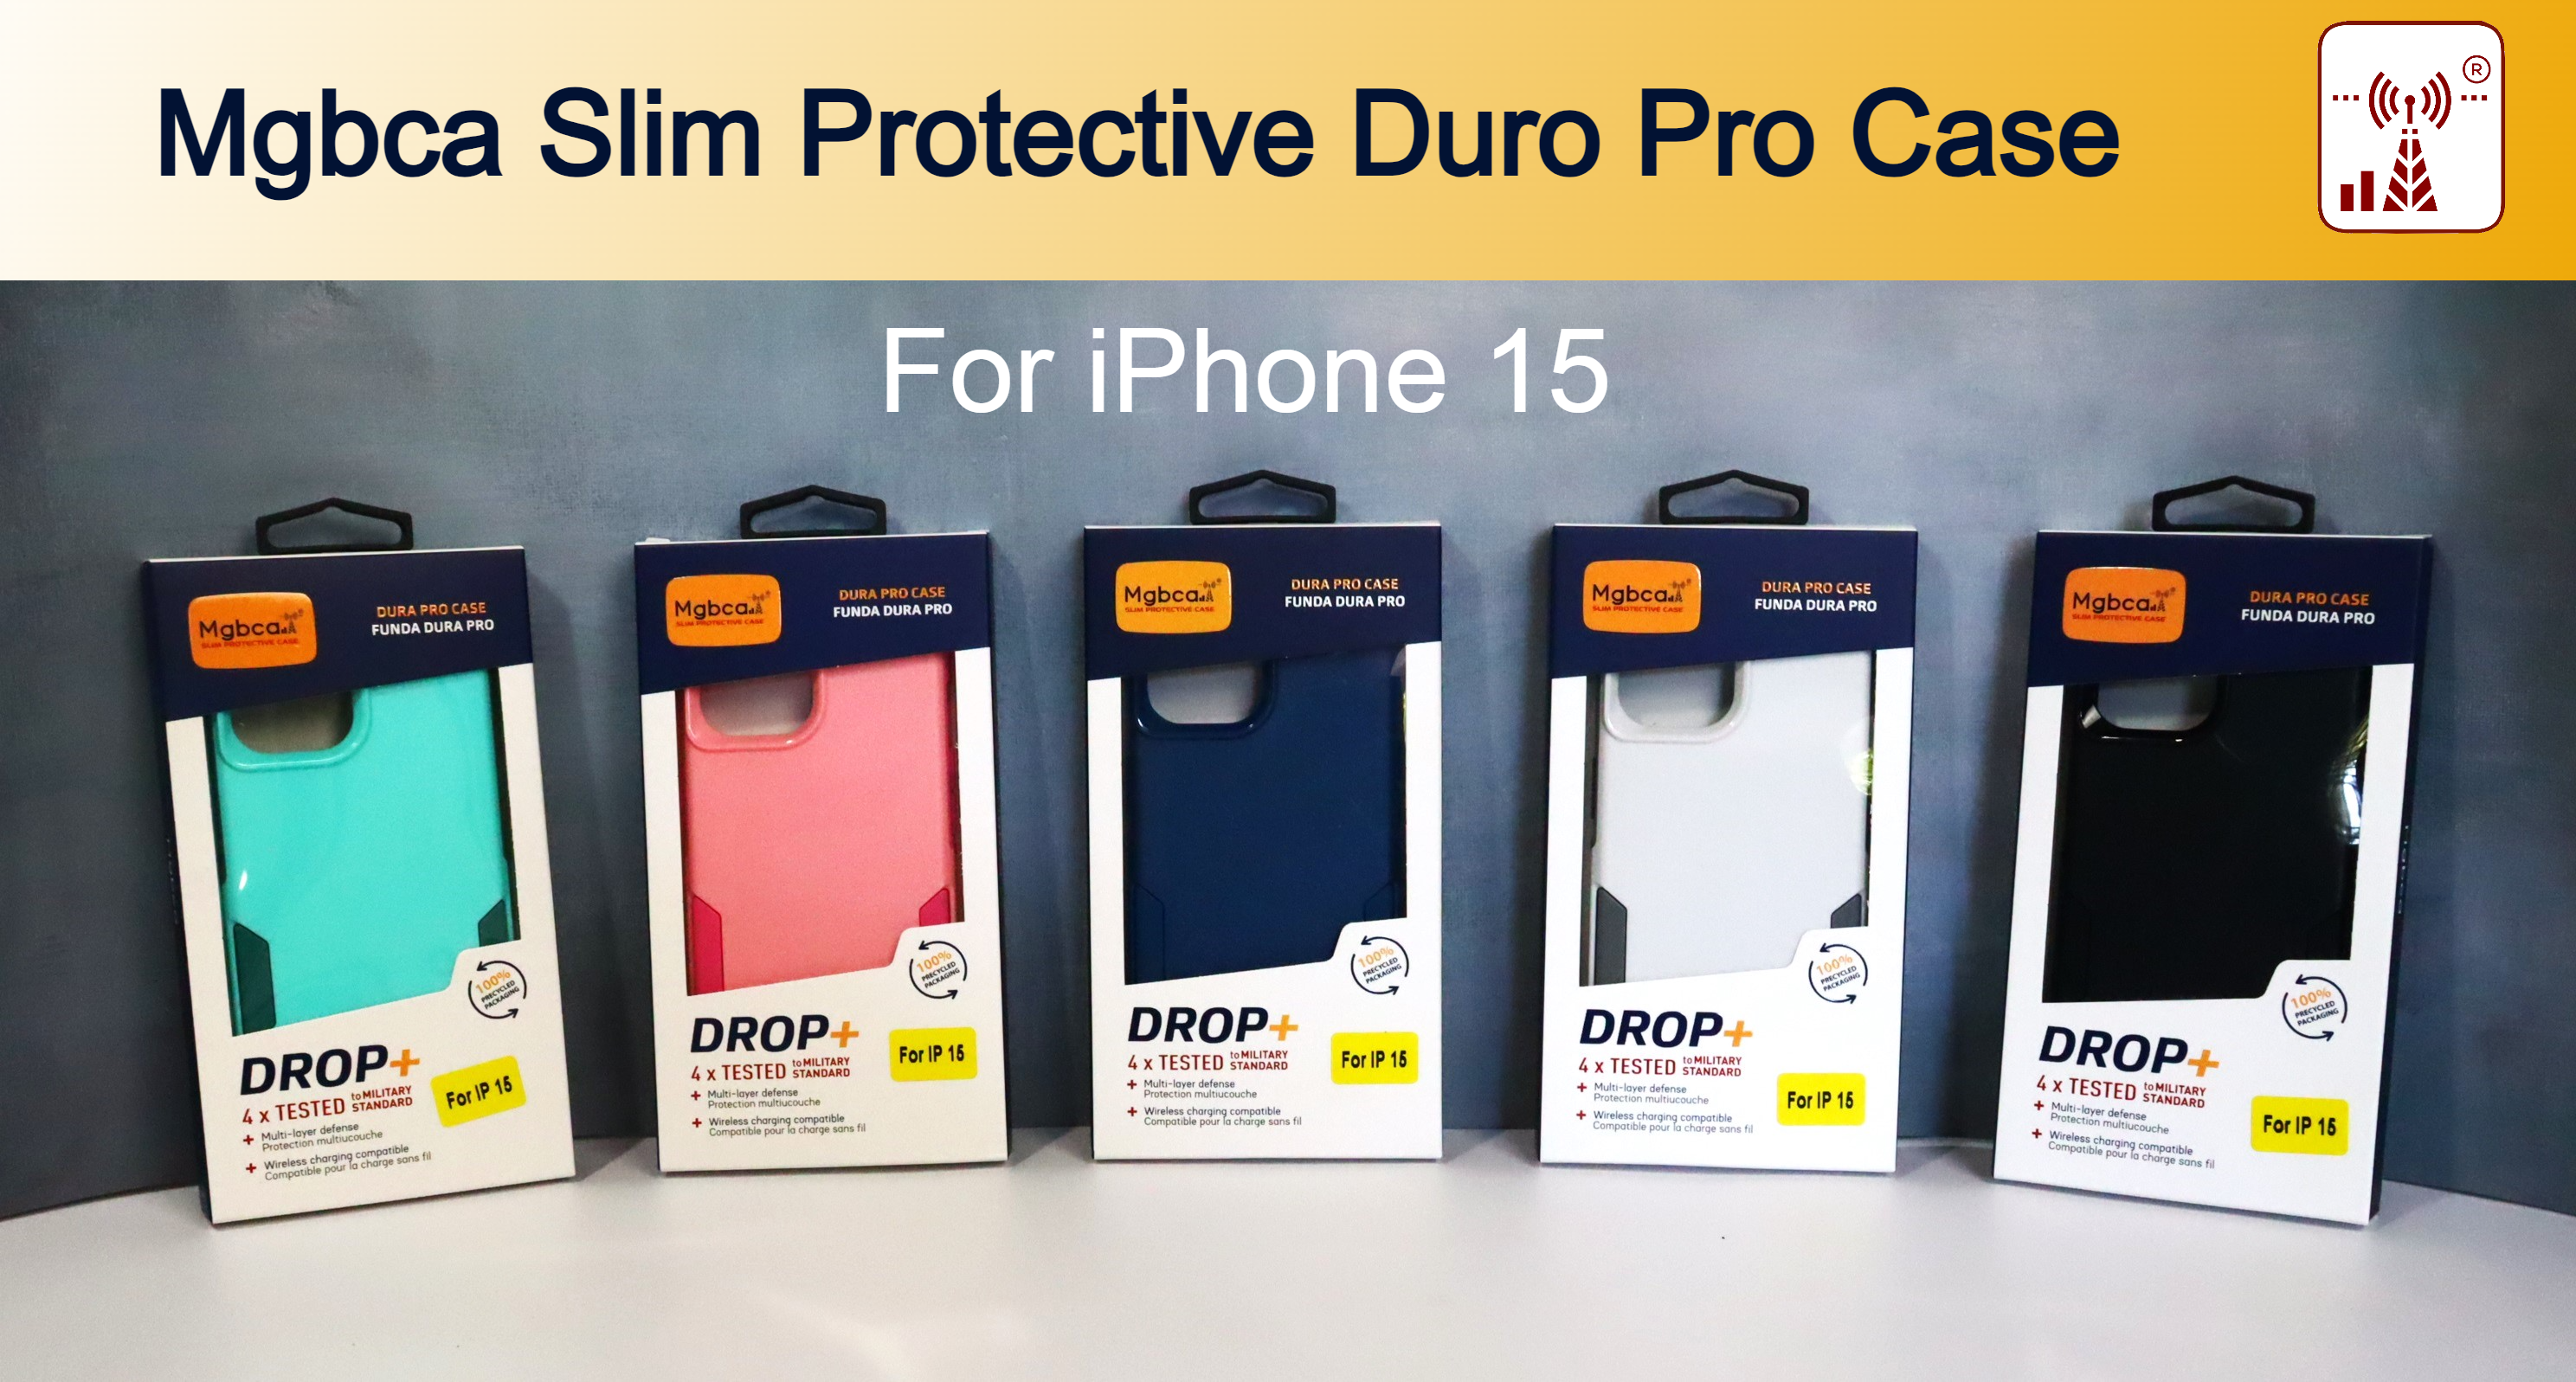 mgbca-slim-protective-dura-pro-case-rugged-2-layered-shock-absorbed-for-iphone-15-banner-picture-3.png